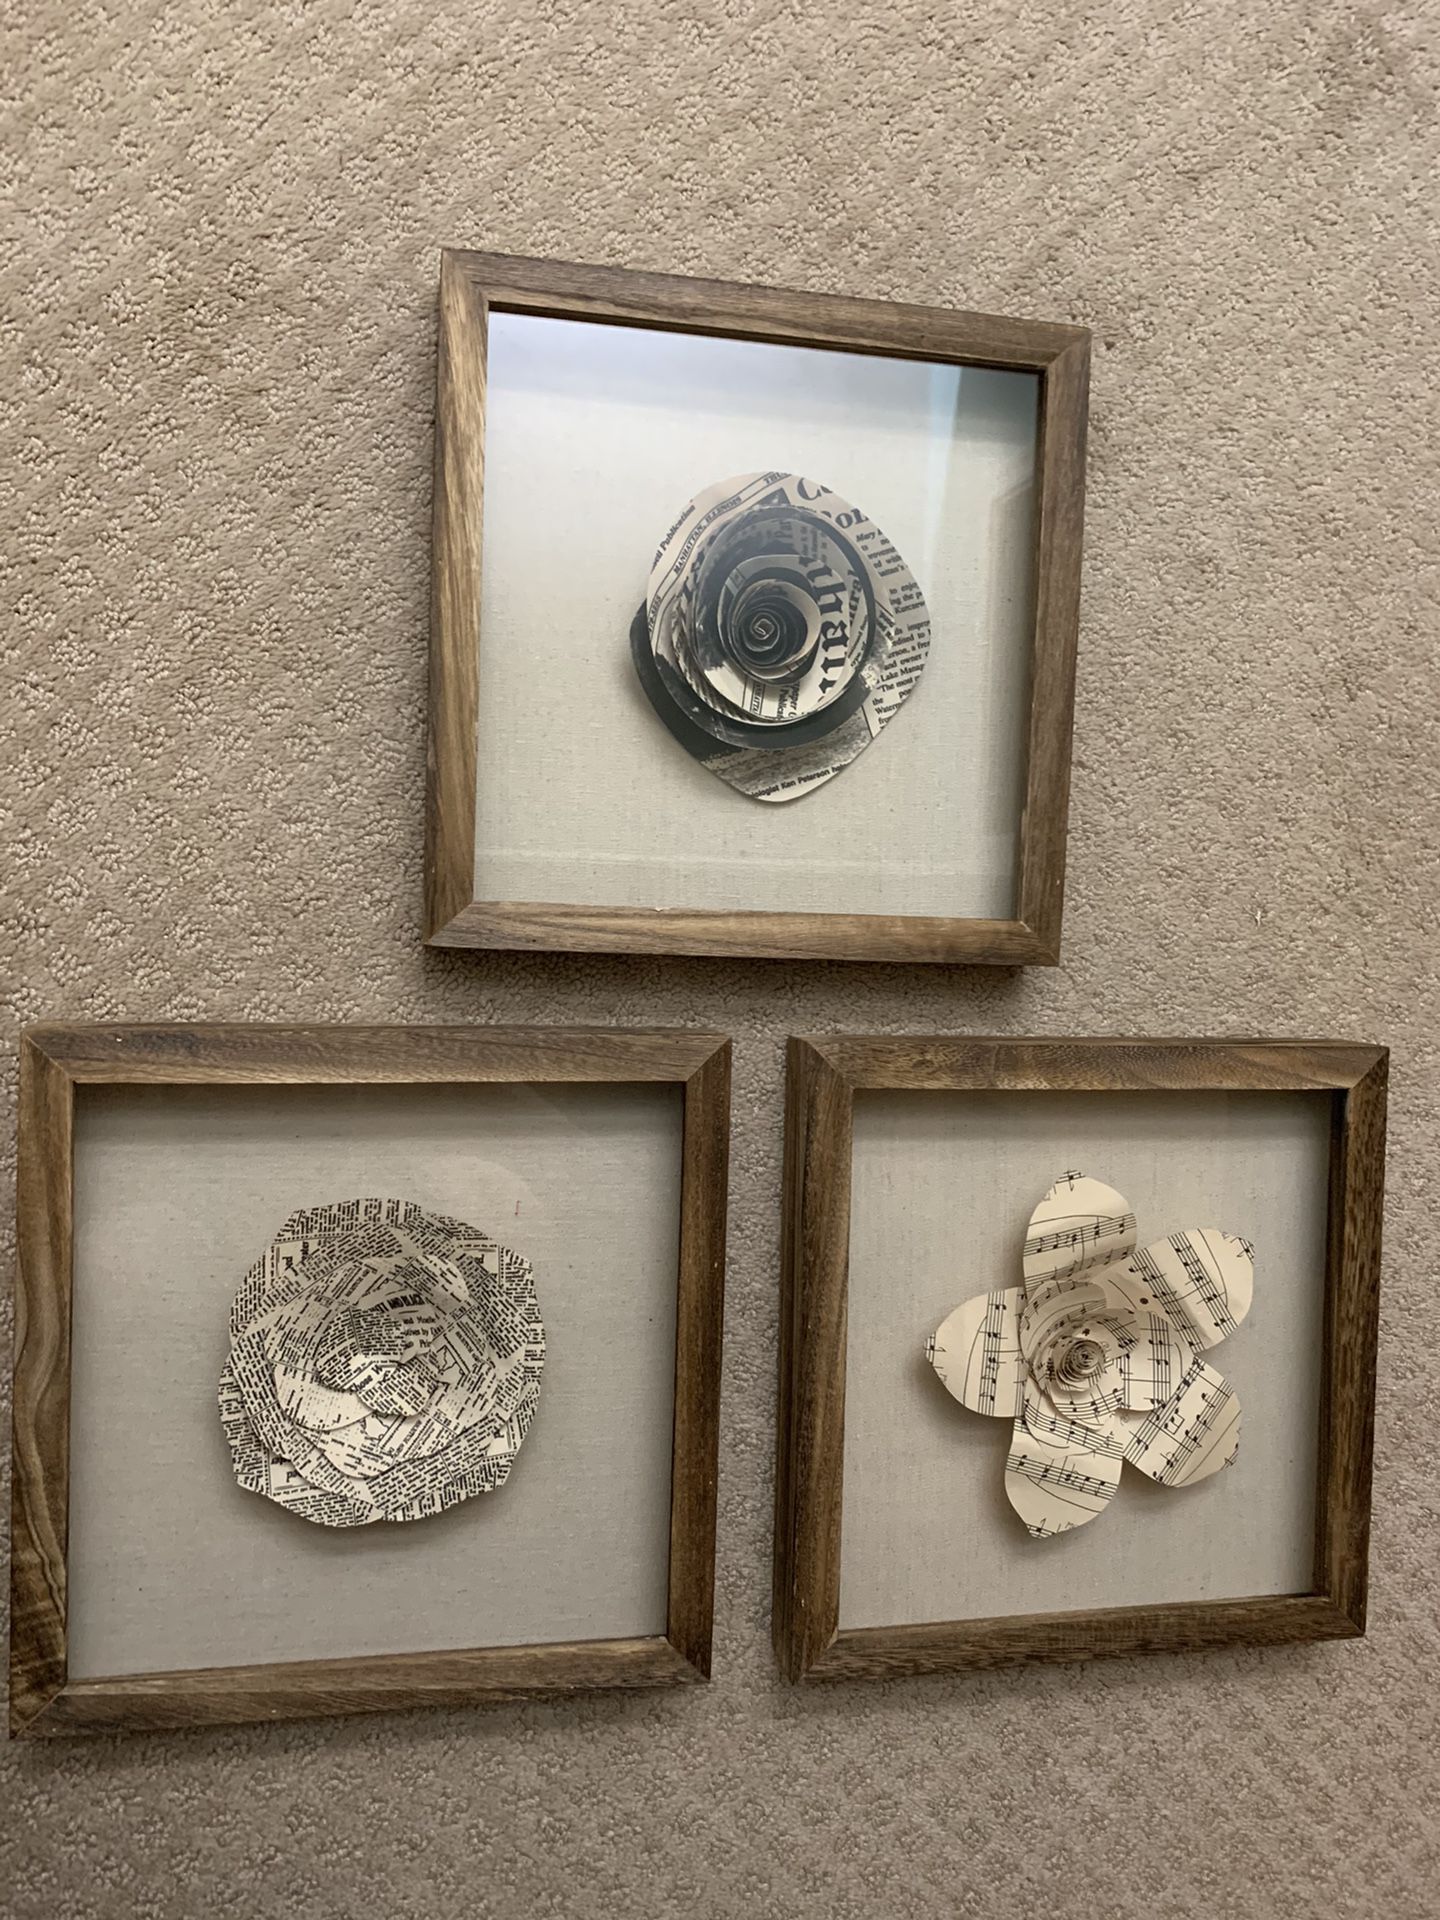 Framed pictures from target